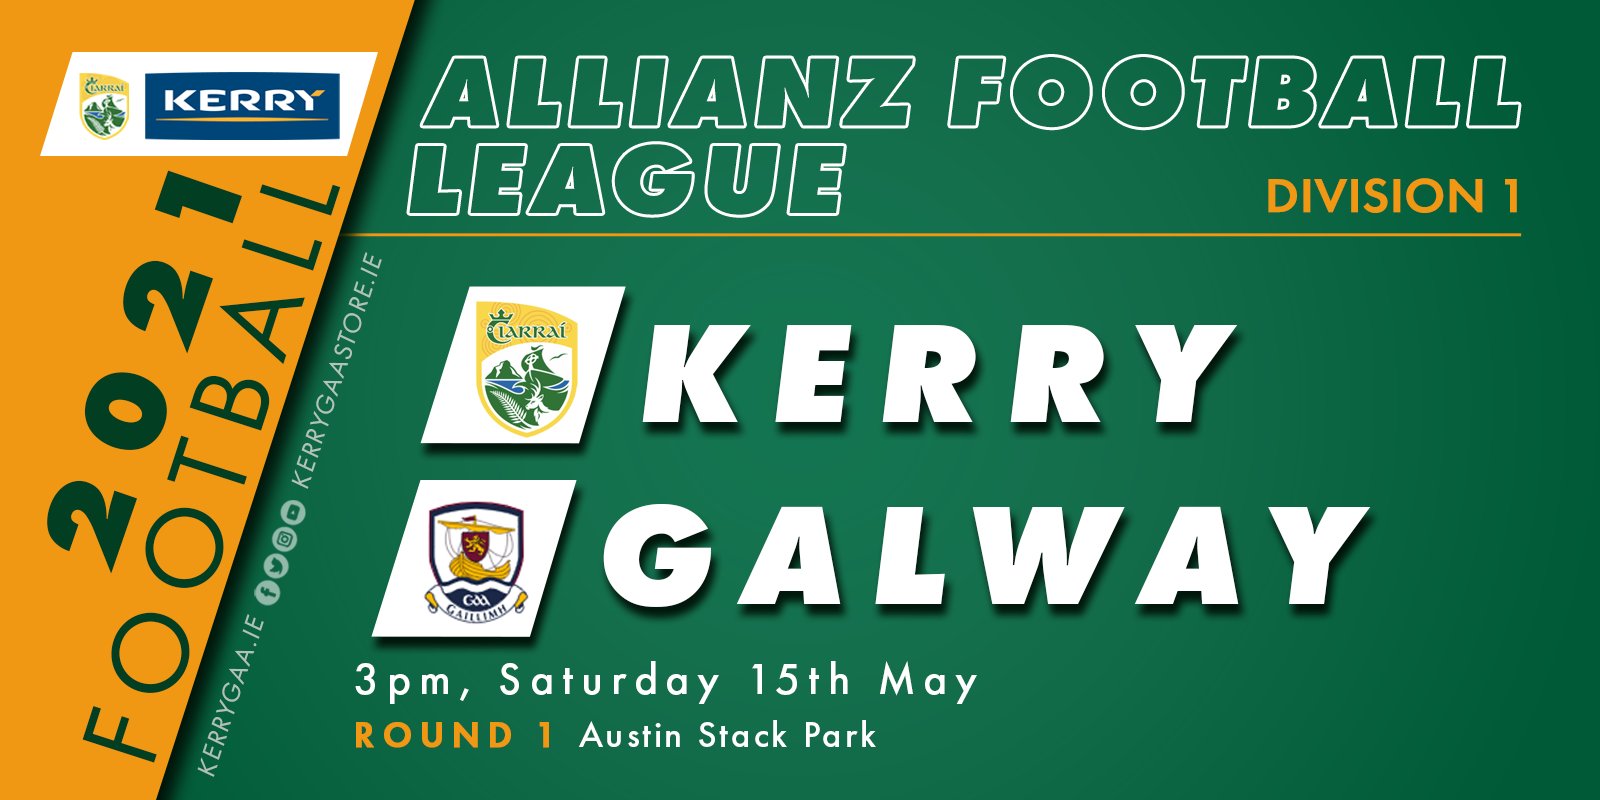 Match Programme: Kerry vs Galway